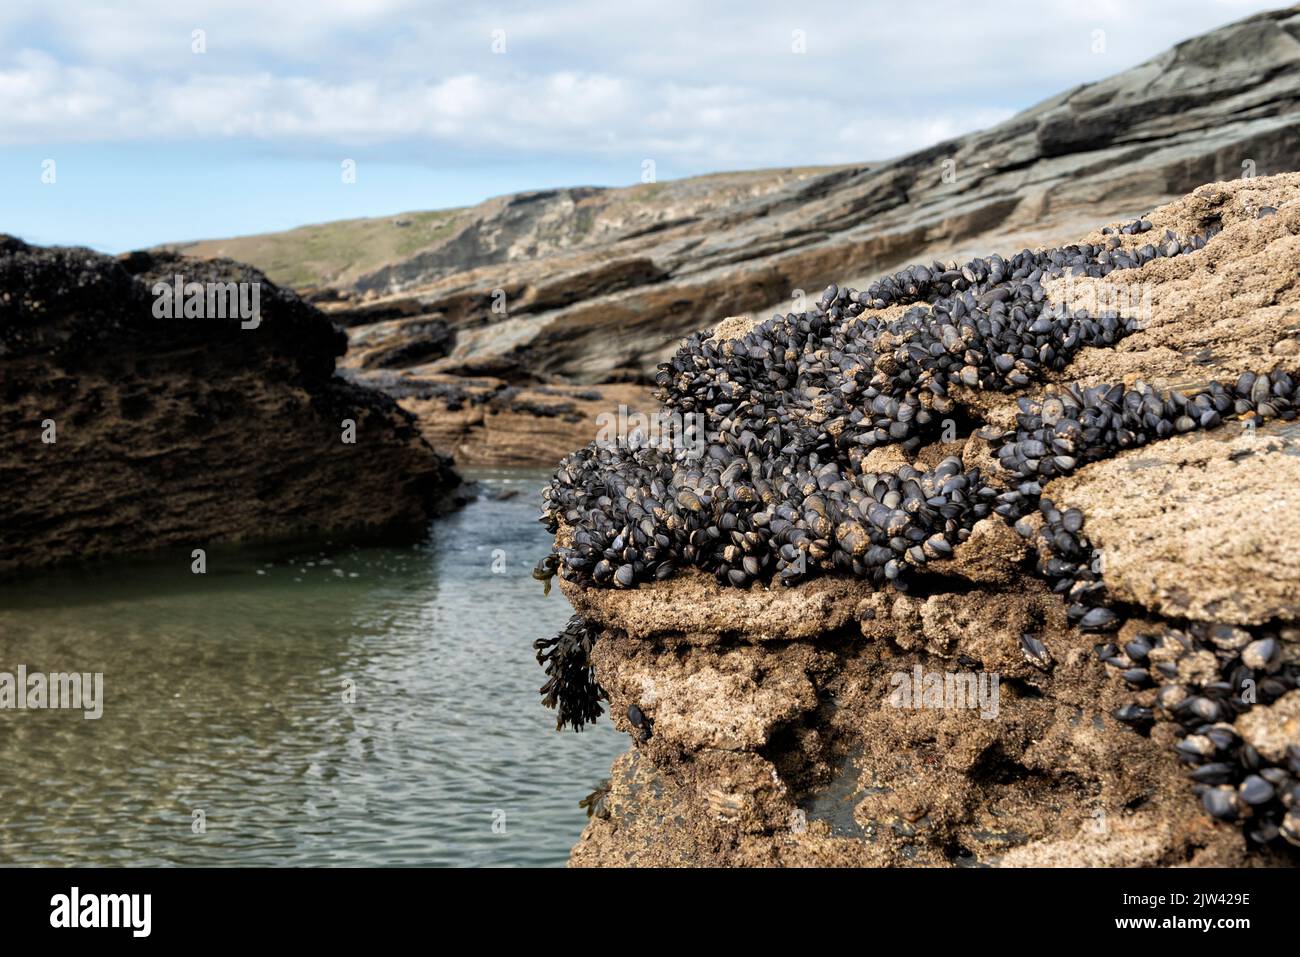 Rocks on the beach covered in mussels and barnacles Stock Photo